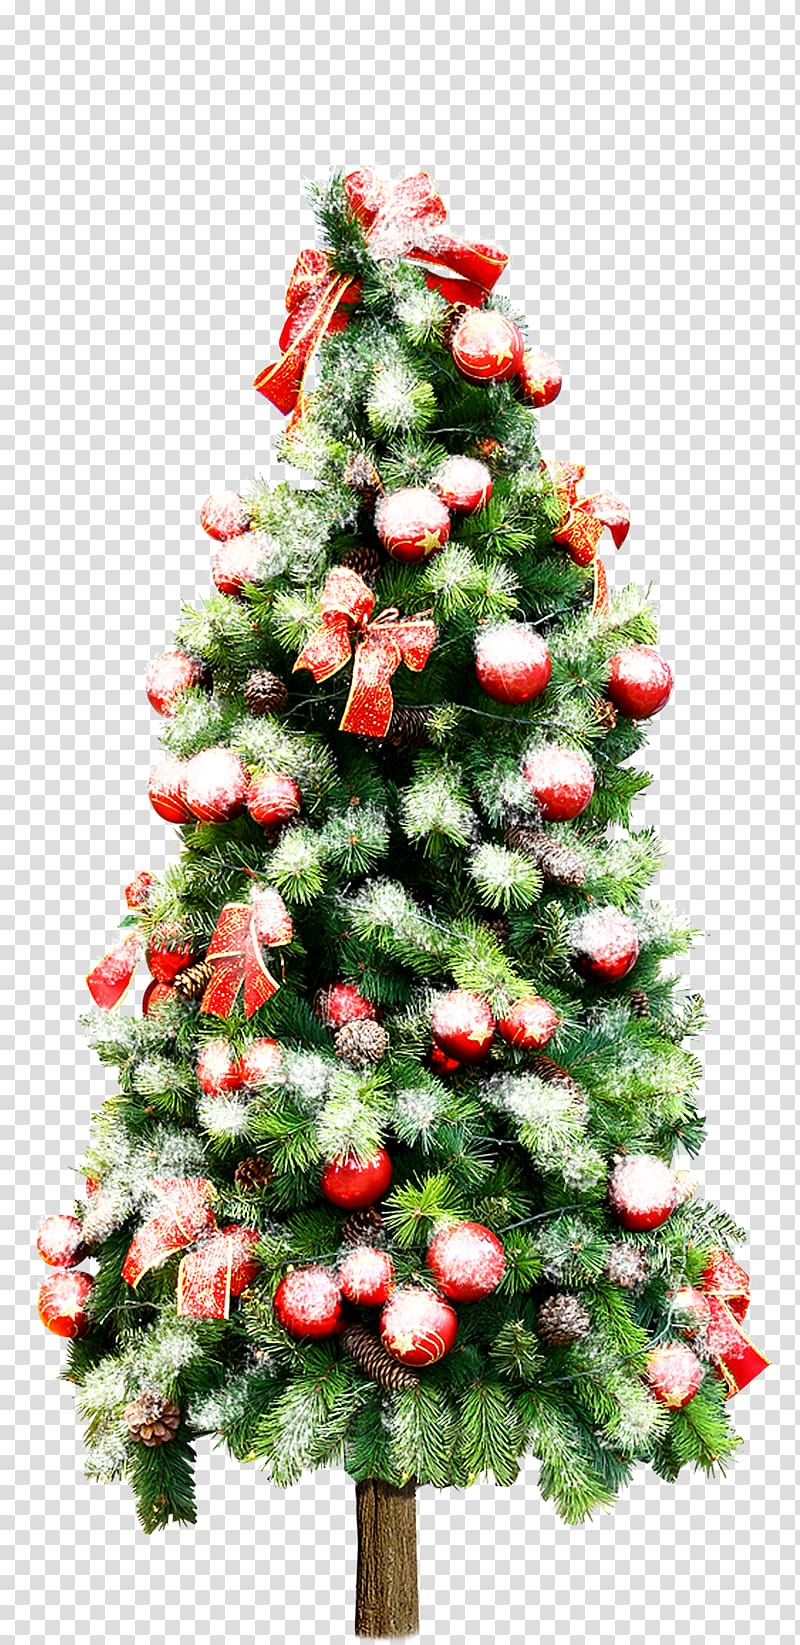 Christmas tree Christmas ornament Christmas card, Beautiful Christmas tree material transparent background PNG clipart